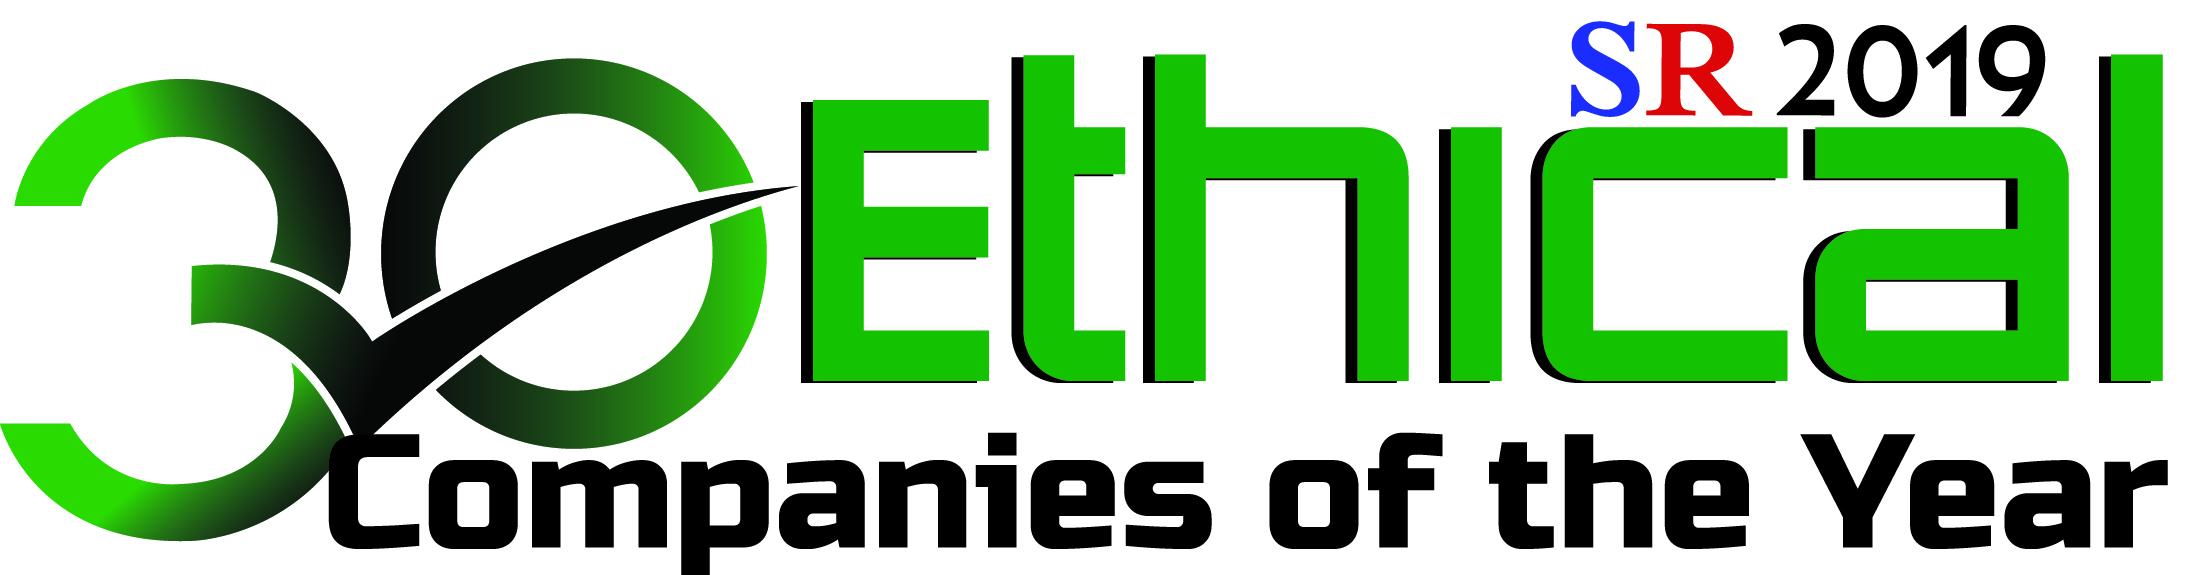 30 Ethical COmpanies of the Year 2019 logo